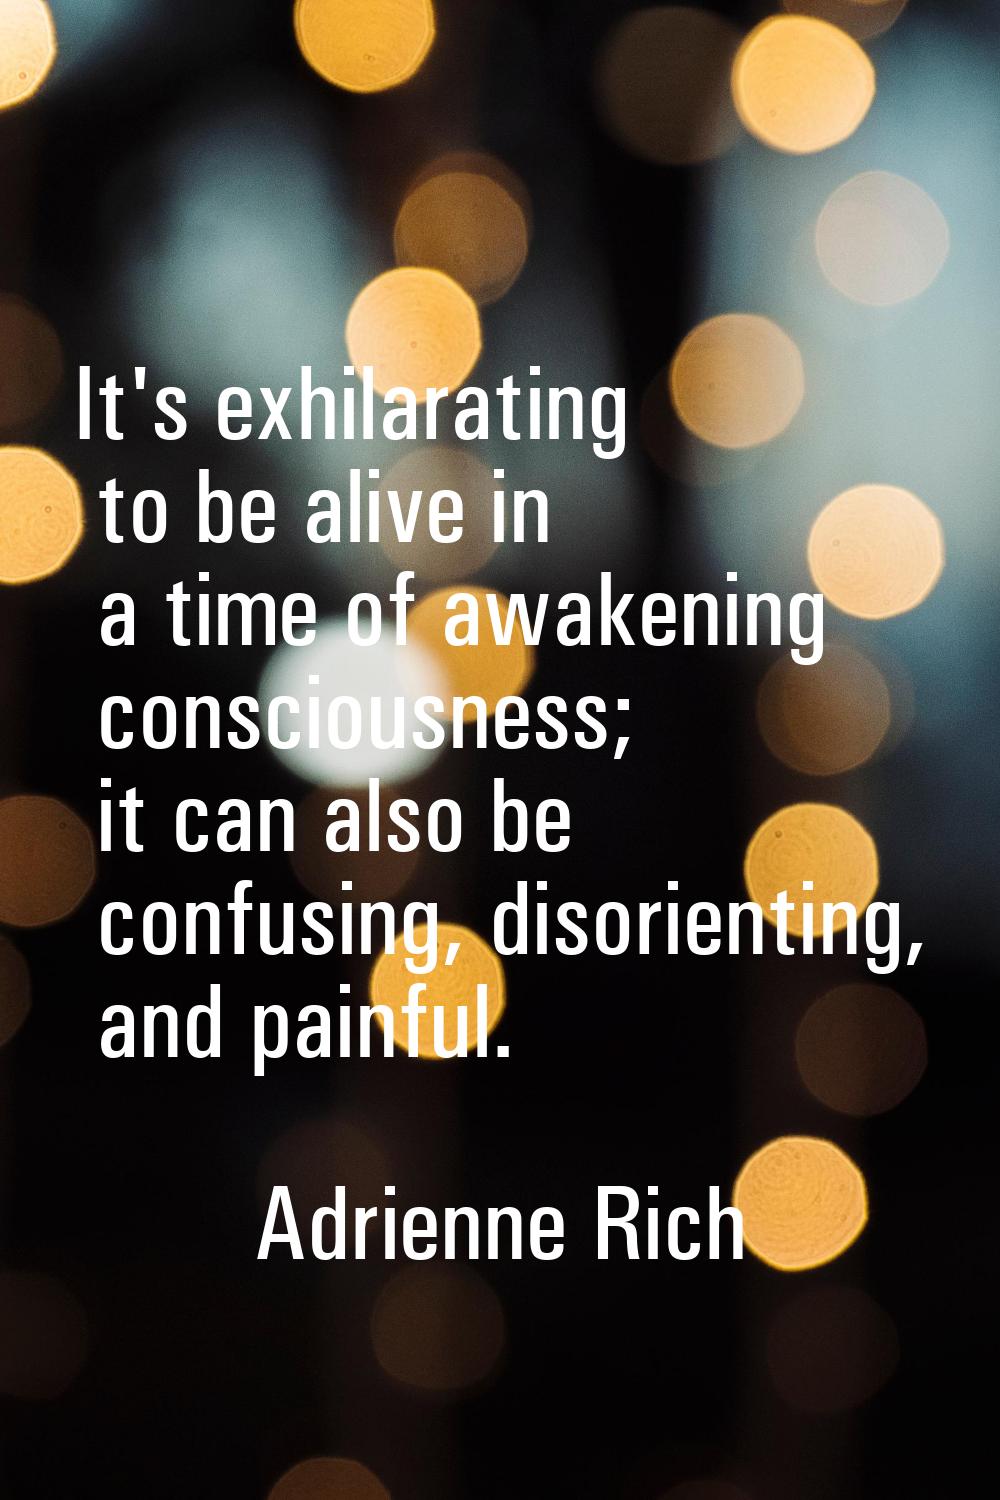 It's exhilarating to be alive in a time of awakening consciousness; it can also be confusing, disor